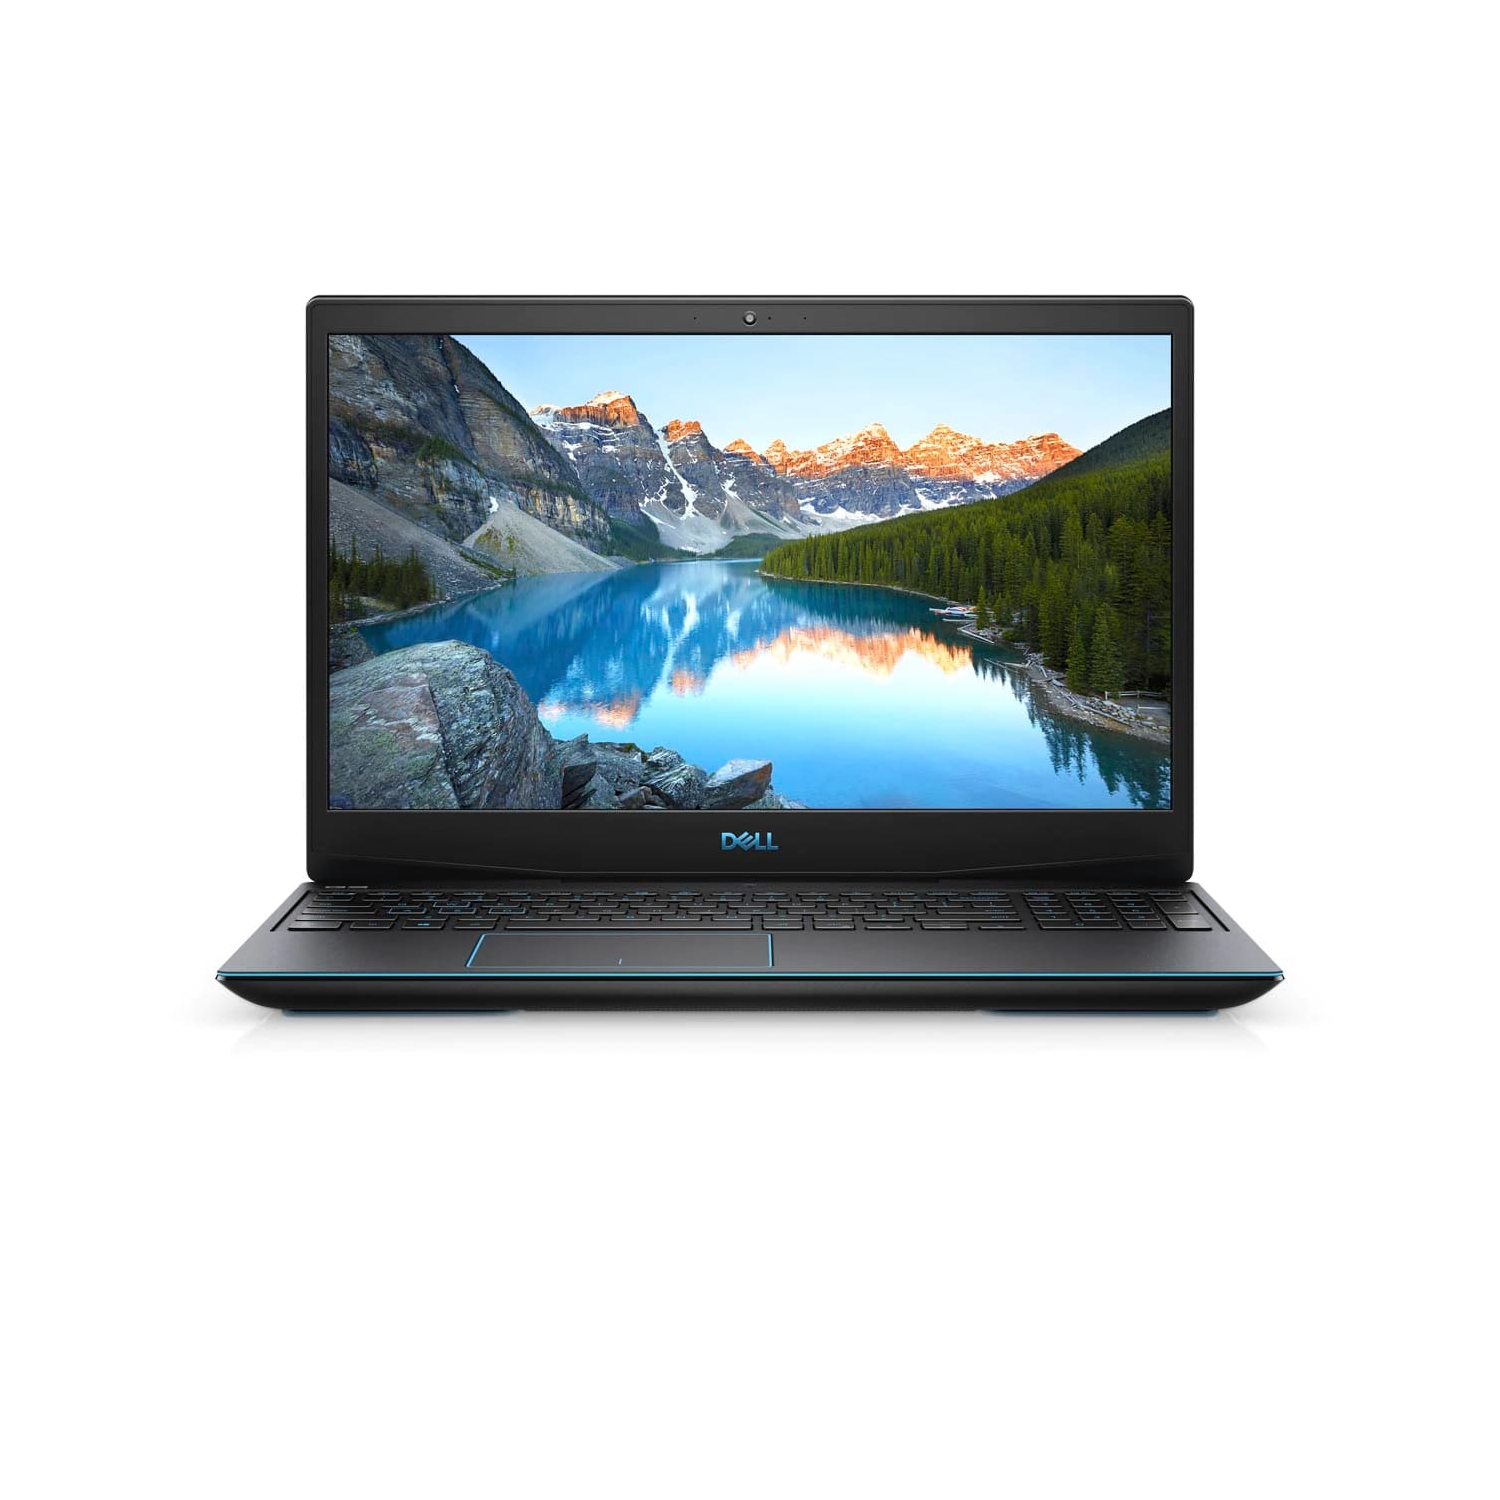 Refurbished (Excellent) - Dell G3 15 3590 Gaming Laptop (2019) | 15.6" FHD | Core i7 - 1TB HDD + 128GB SSD - 12GB RAM - 1660 Ti | 6 Cores @ 4.5 GHz Certified Refurbished